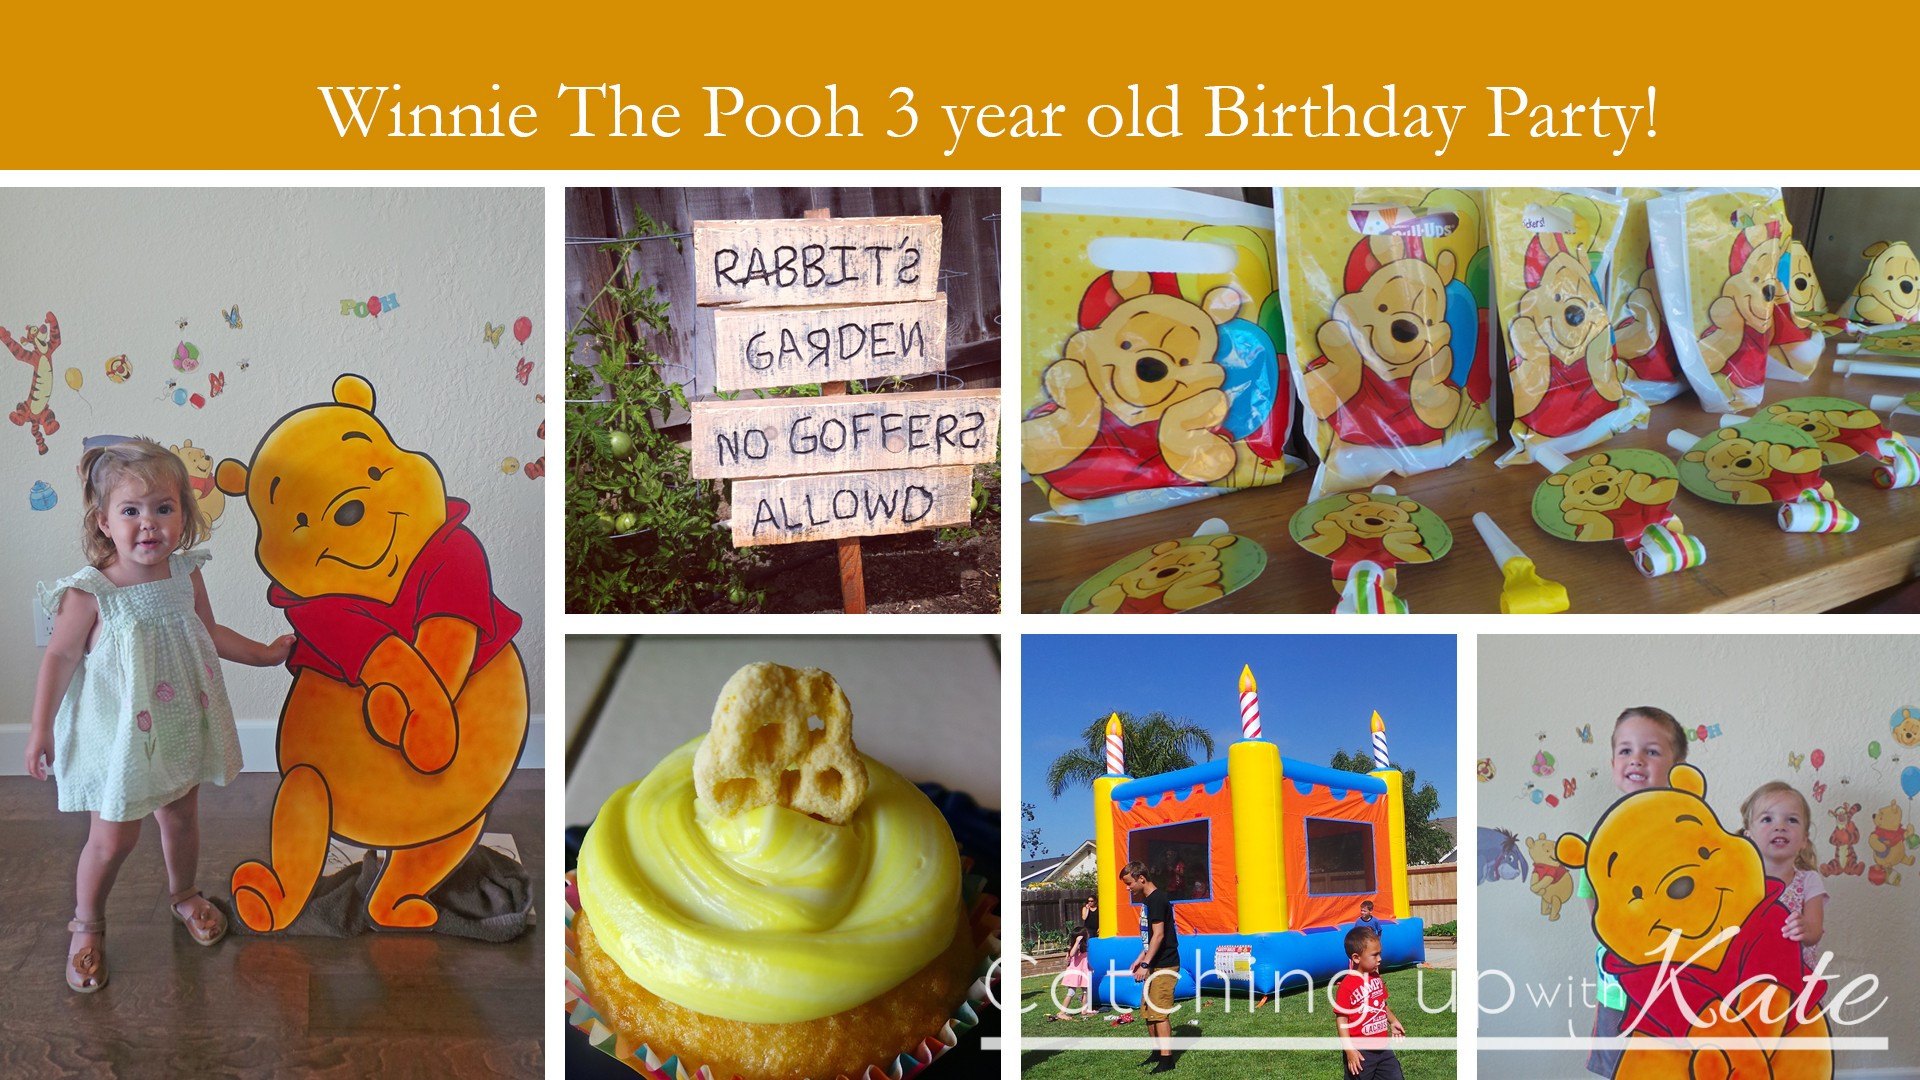 Winnie The Pooh Birthday Party Decorations
 Winnie the Pooh Birthday Party